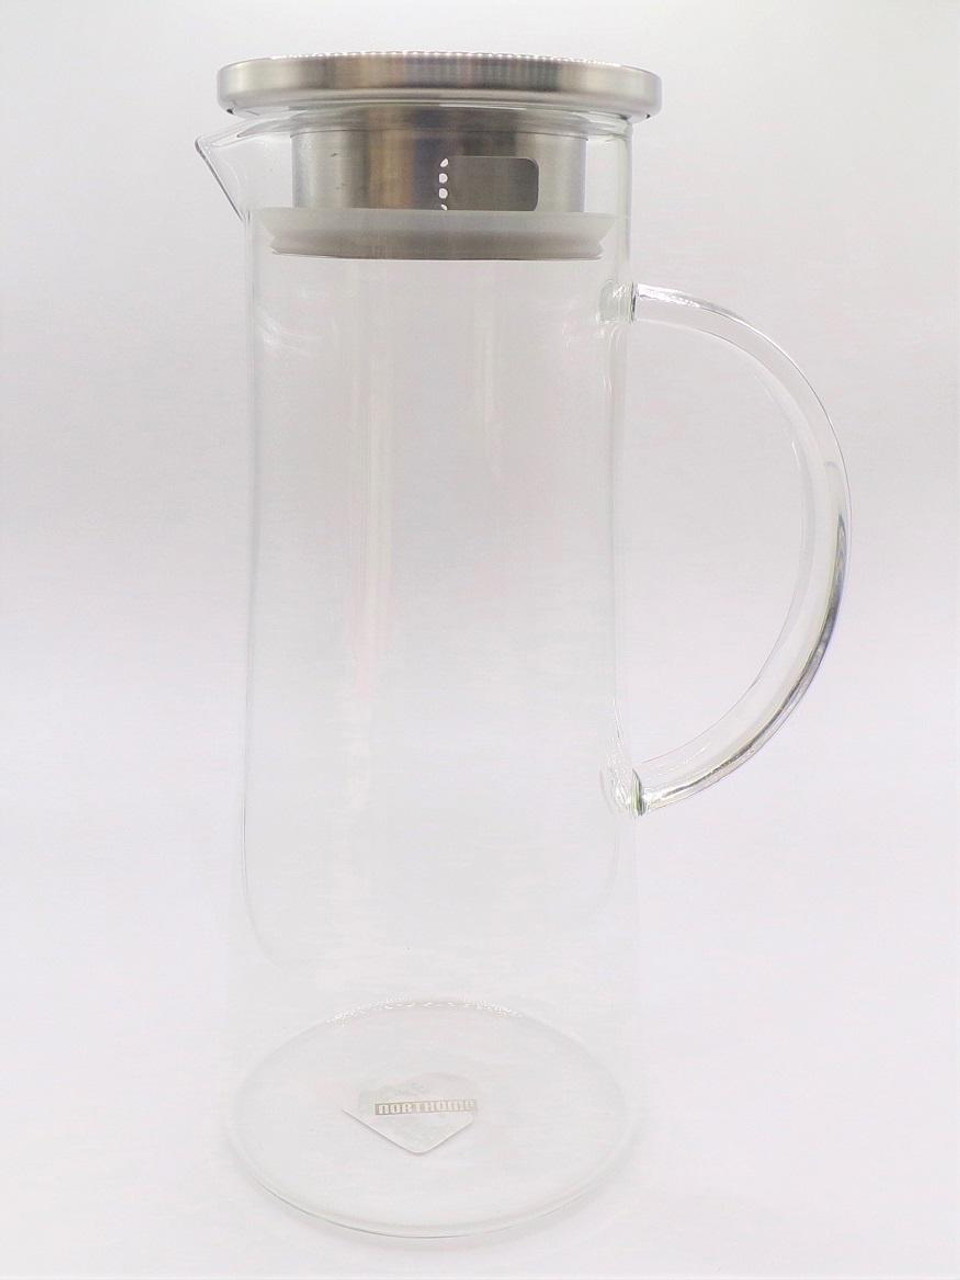 https://cdn11.bigcommerce.com/s-1nr8hwfbkq/images/stencil/1280x1280/products/2753/8445/the-grateful-tea-co-glass-pitcher-tall-with-lid-43-oz__05373.1645938734.jpg?c=2